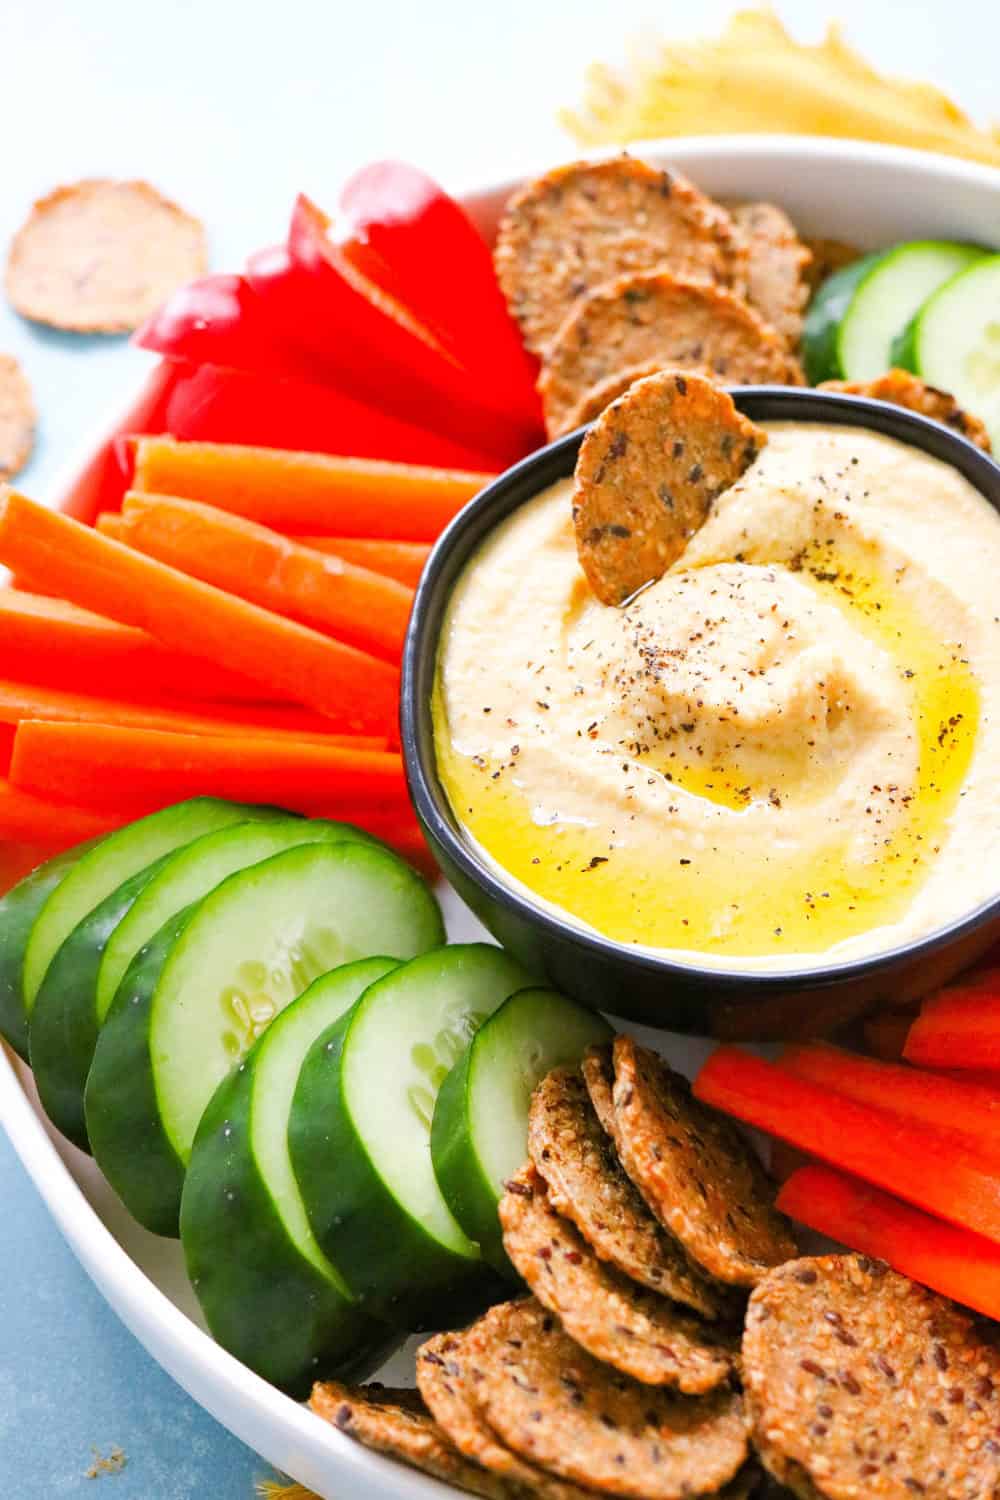 dipping cracker in homemade hummus on a platter with veggies and more crackers